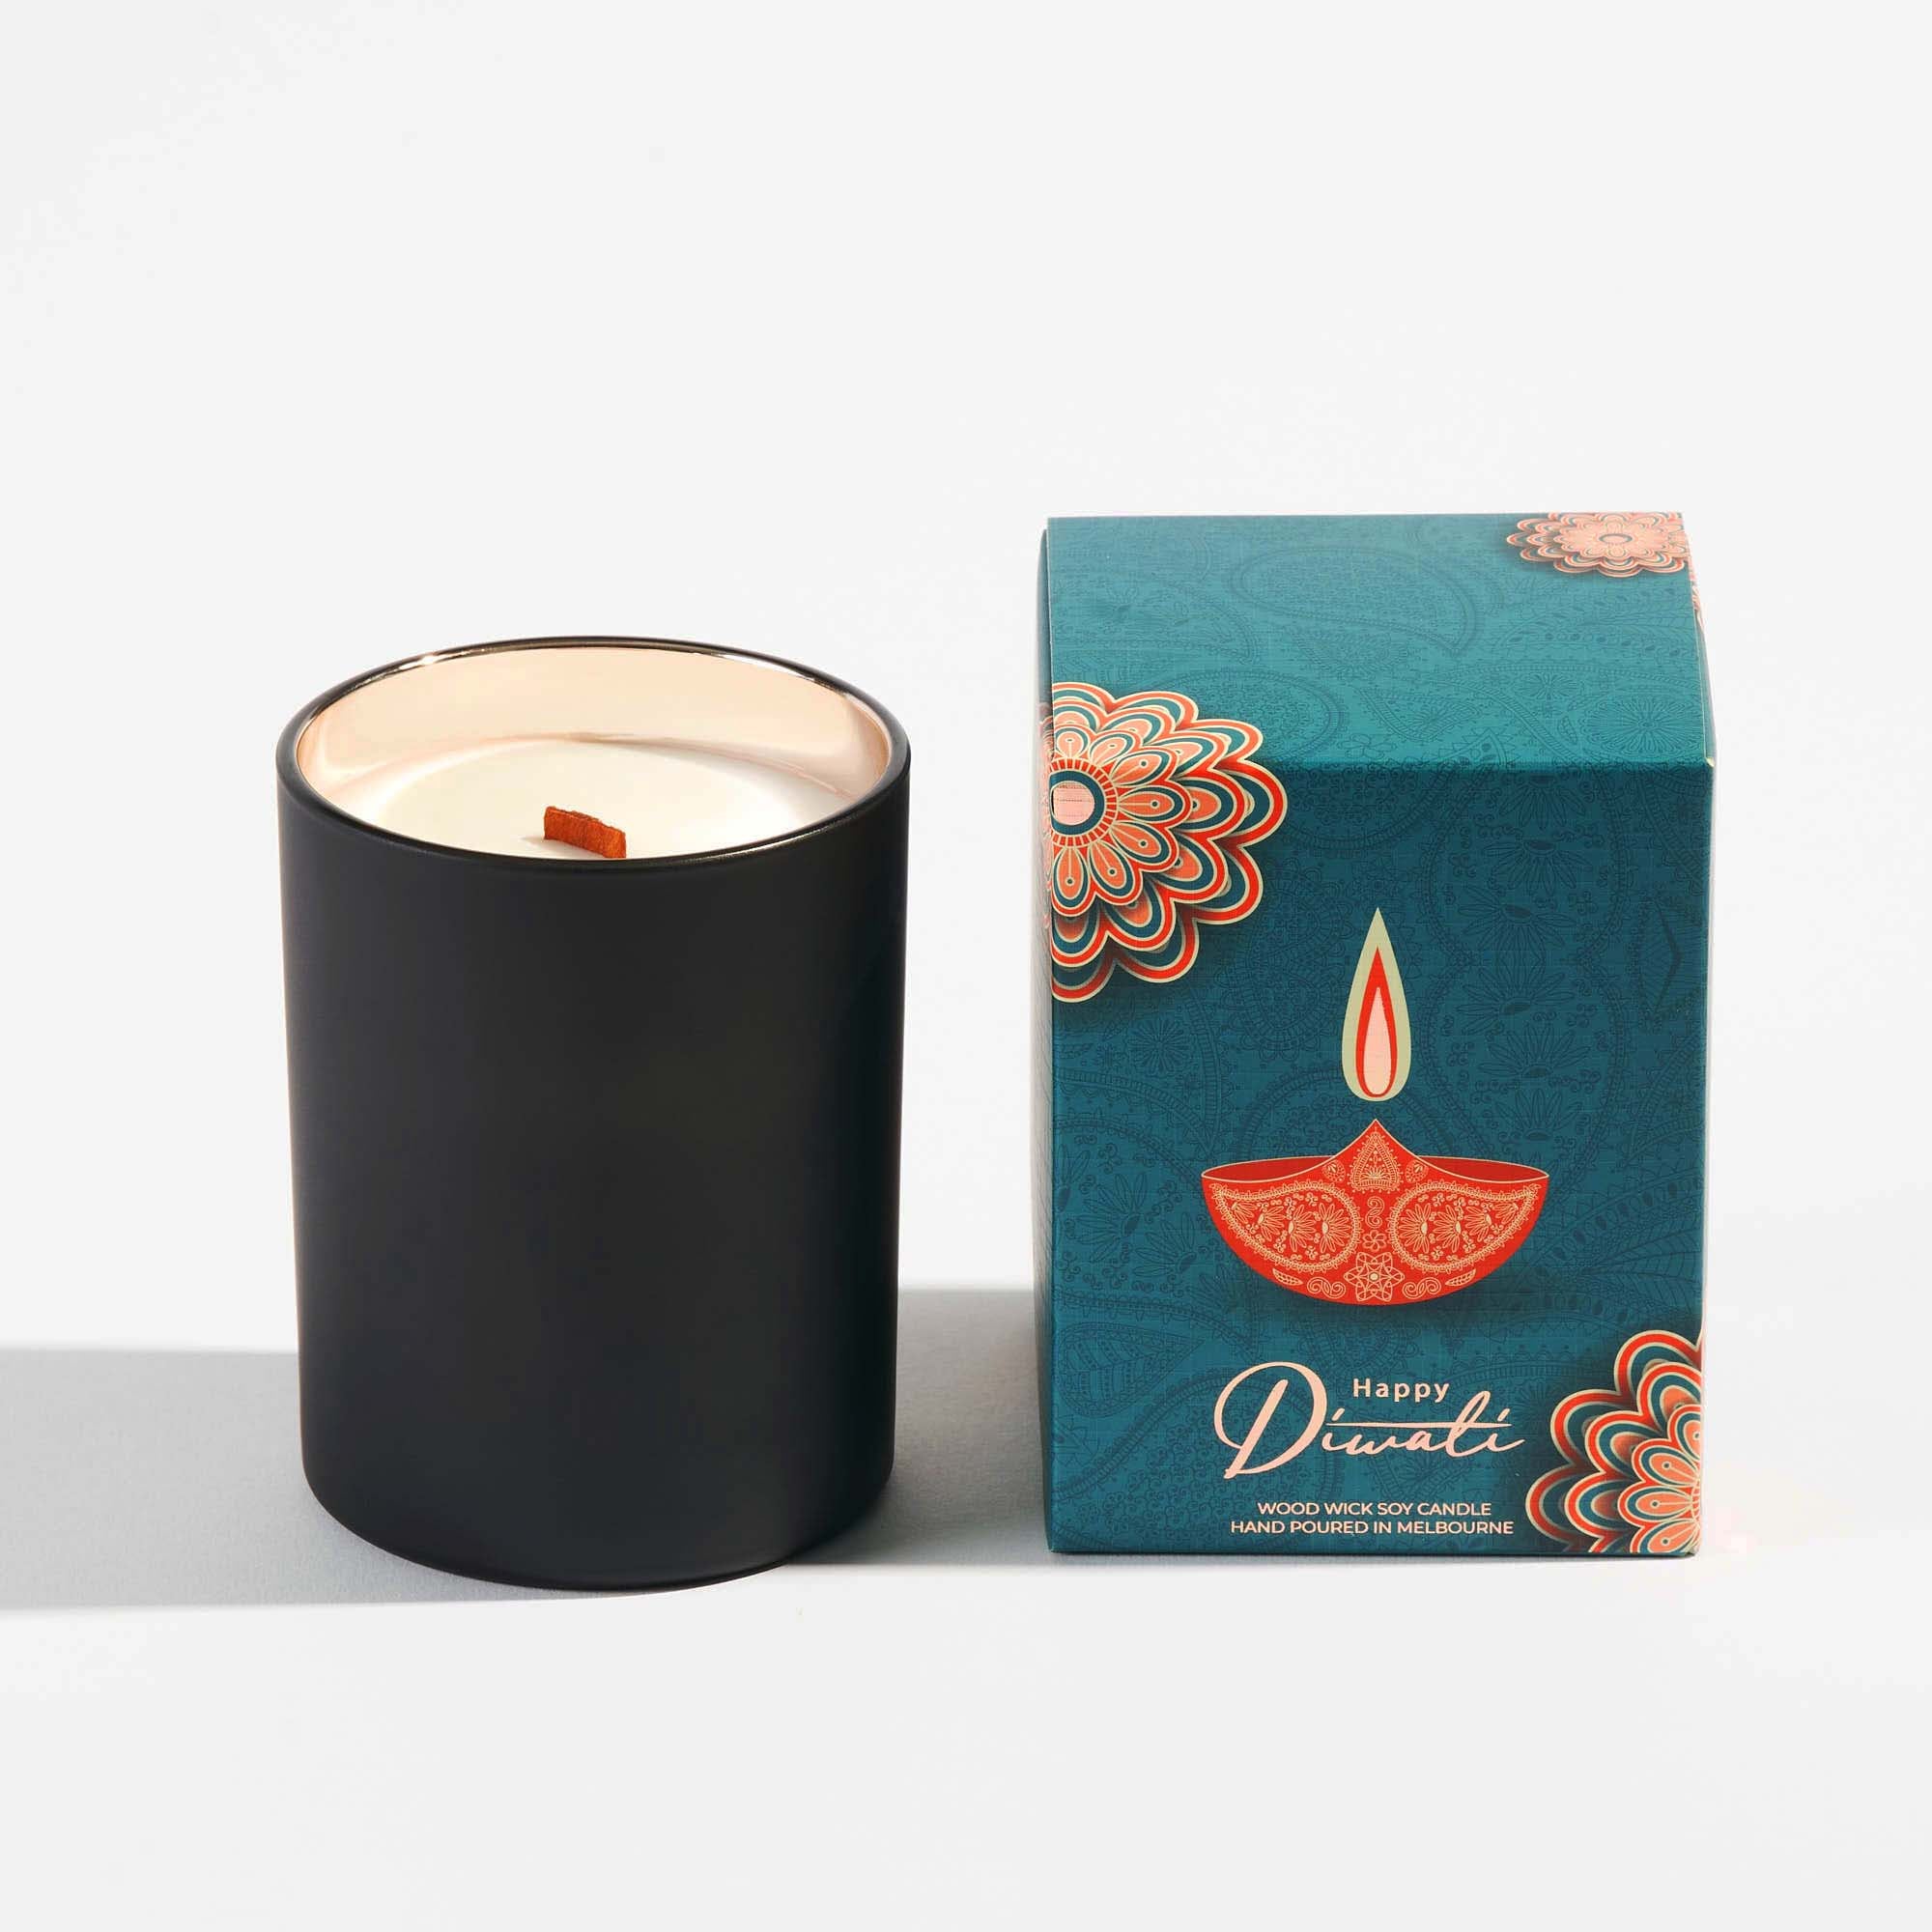 Diwali Candle | Luxury Candles & Home Fragrances by Light + Glo